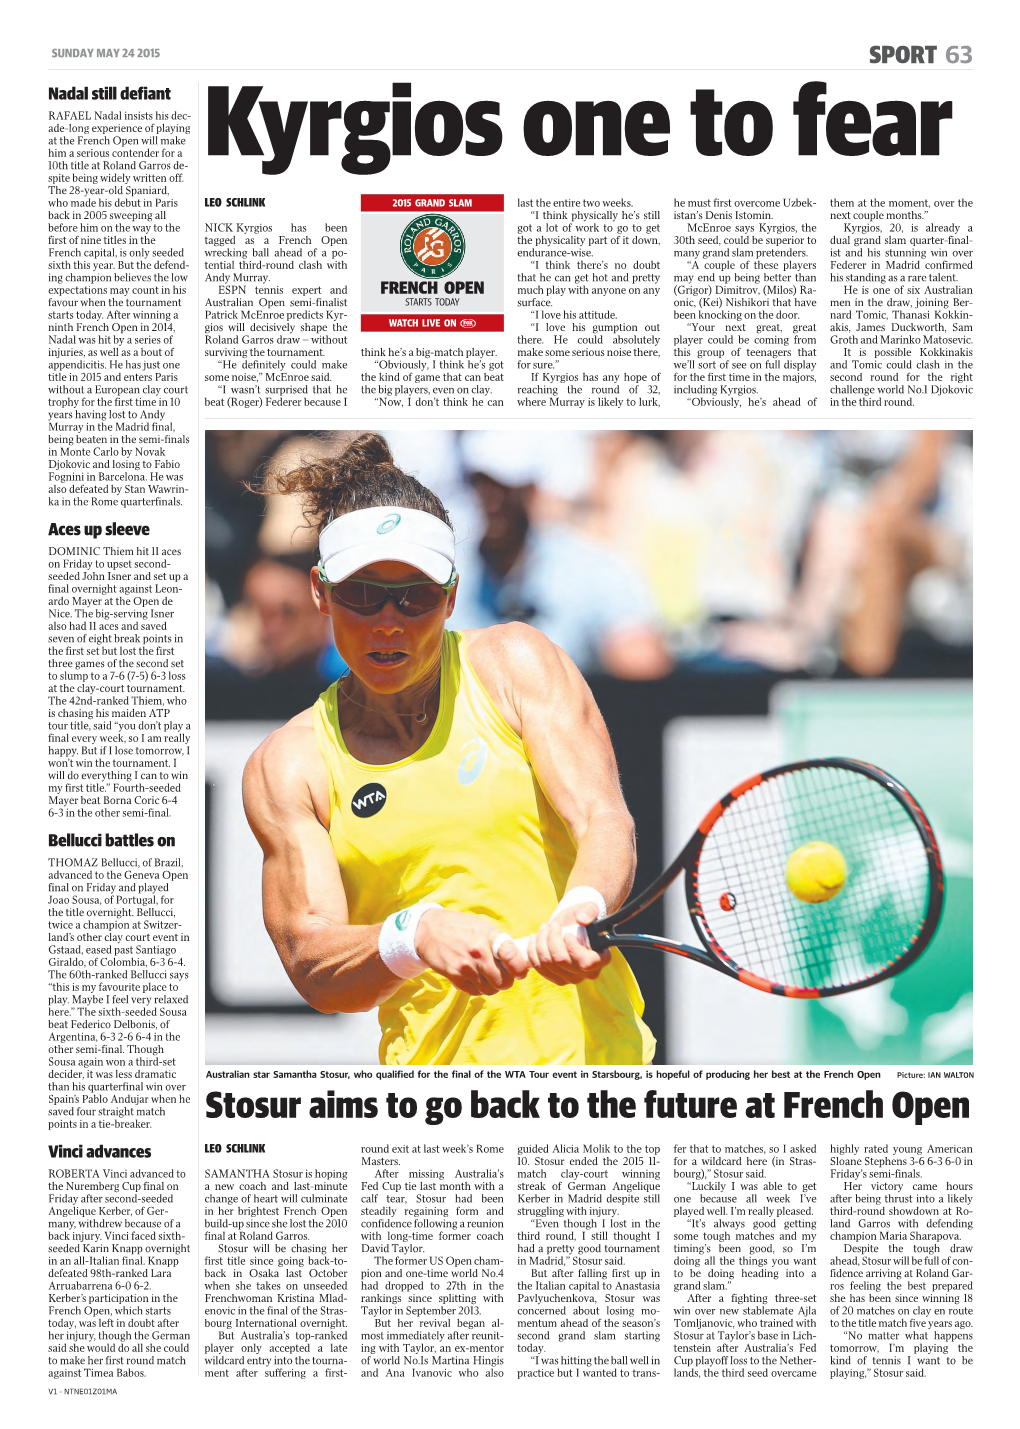 Stosur Aims to Go Back to the Future at French Open Points in a Tie-Breaker